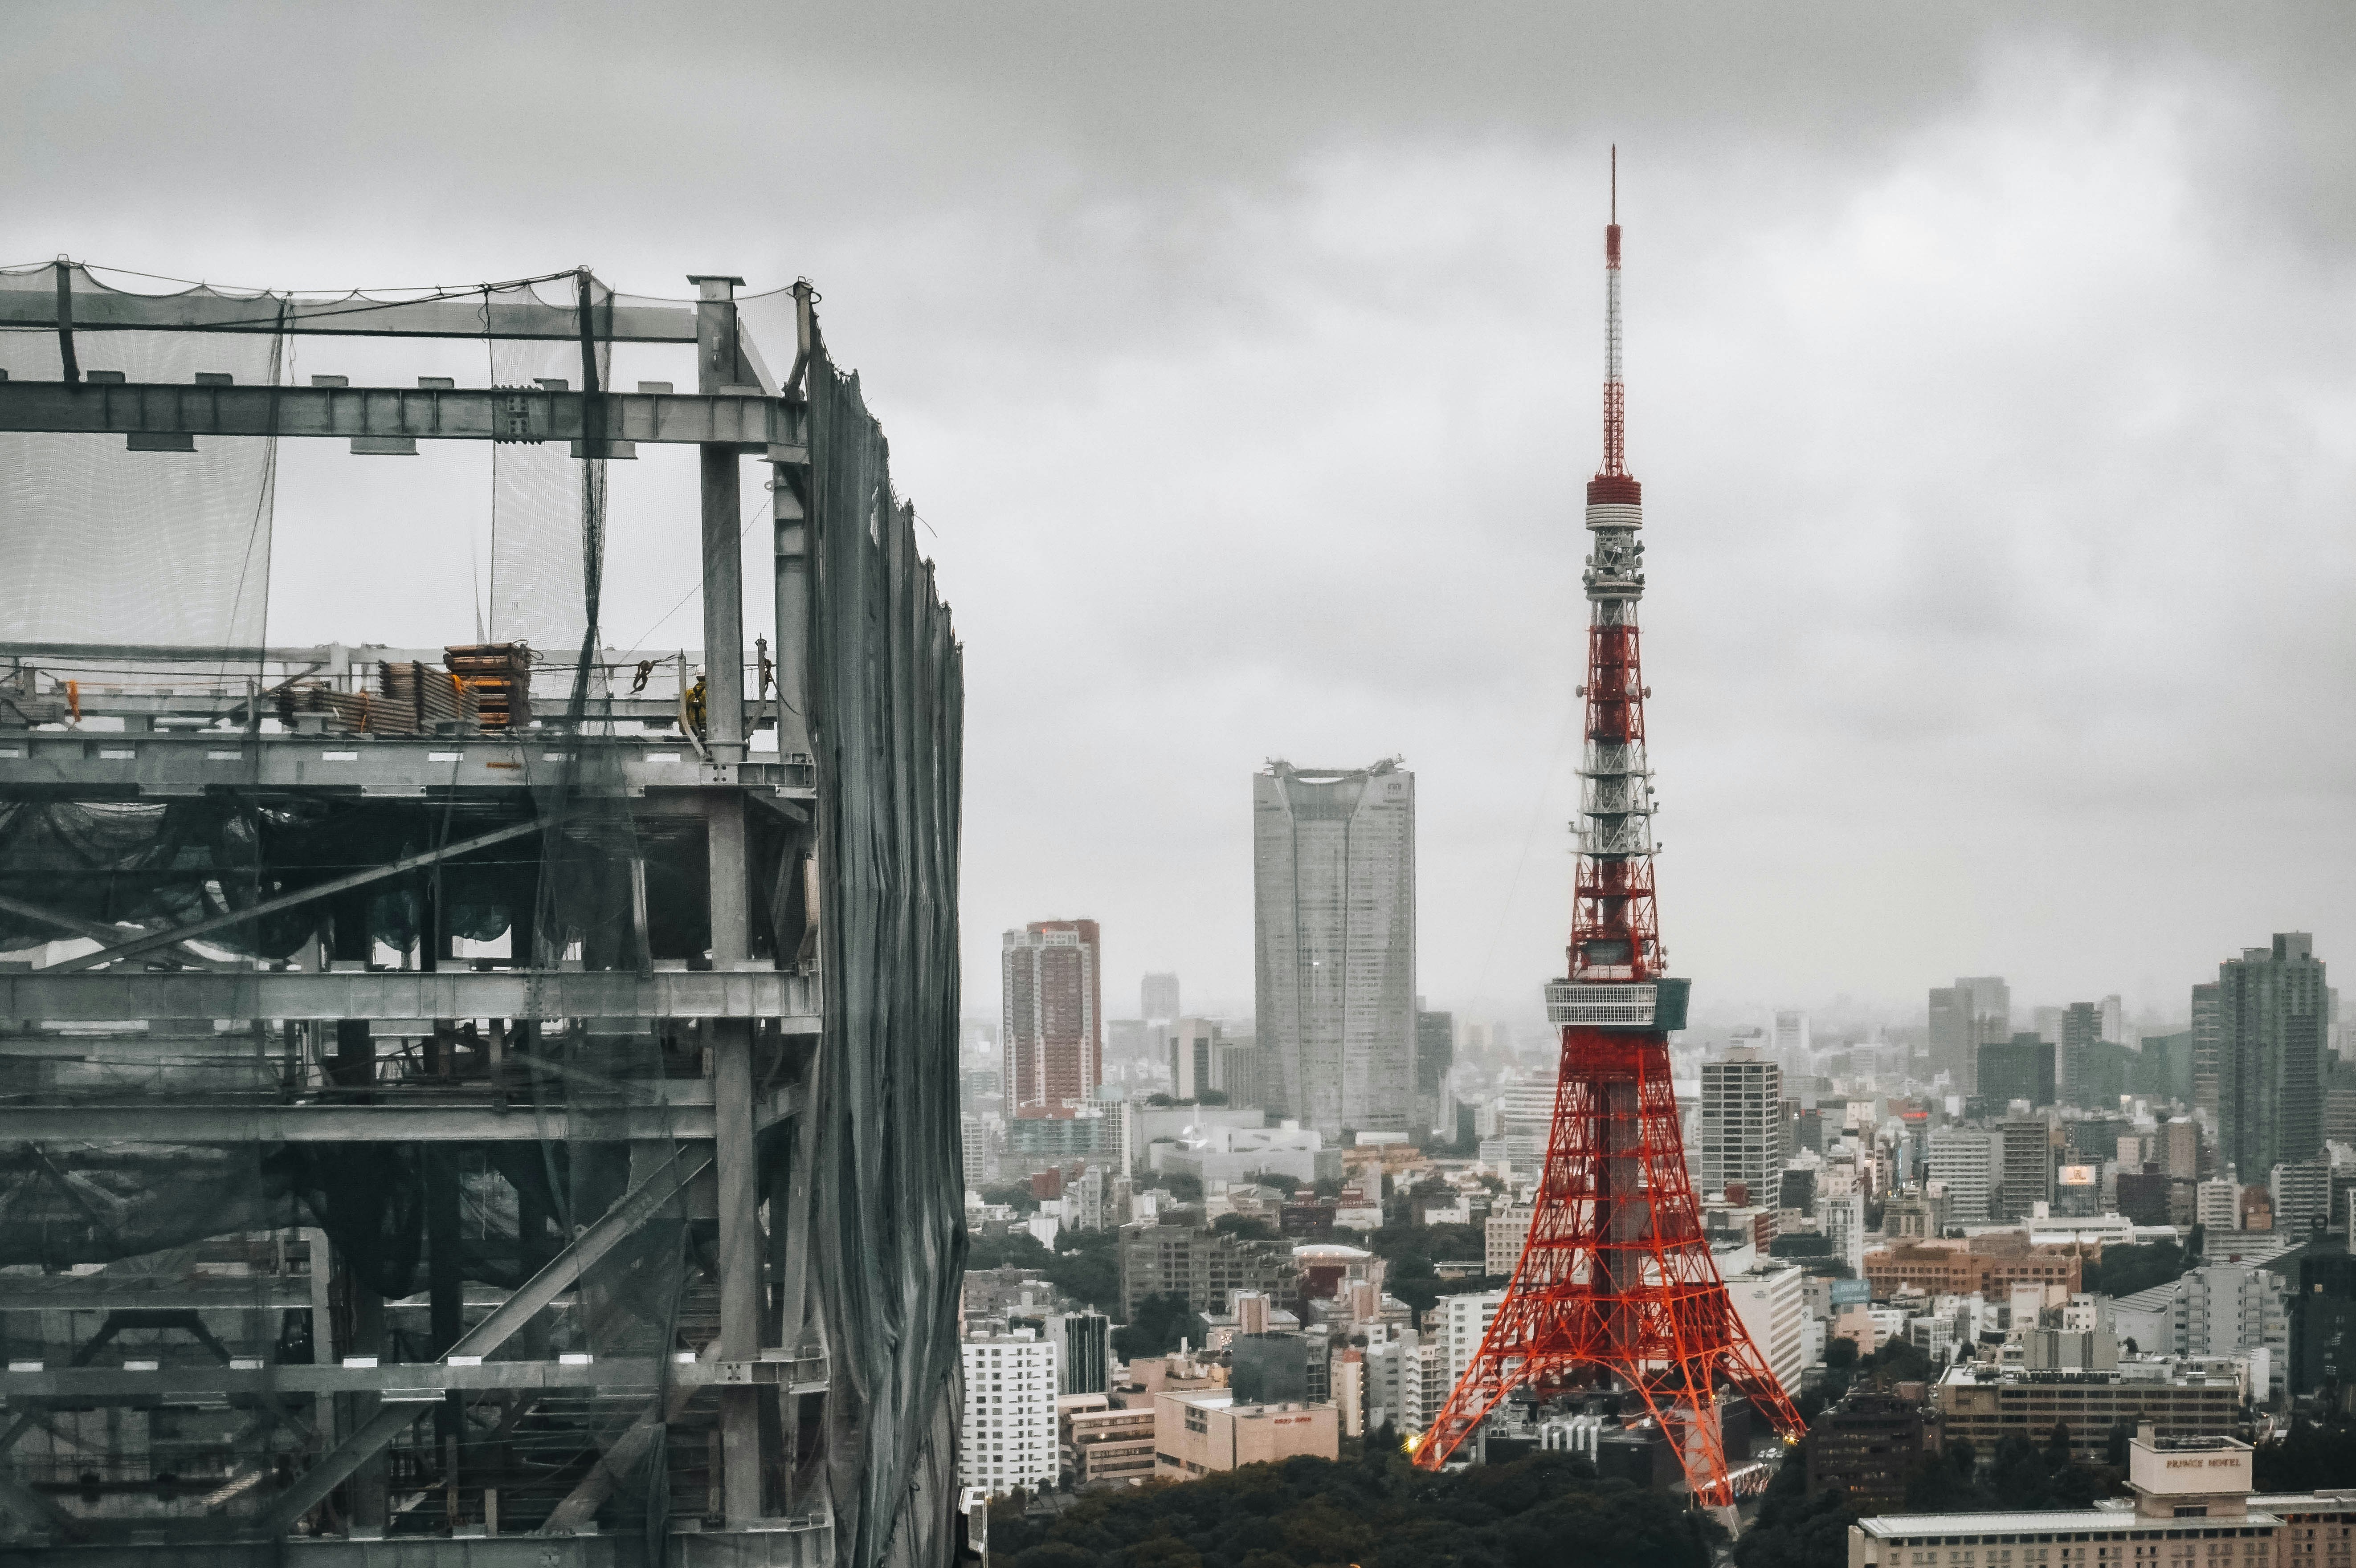 We went to World Trade Center and saw this colossal structure blocking our view; thankfully the end of the corner left some tight space for the beauty of Tokyo Tower to peak through.